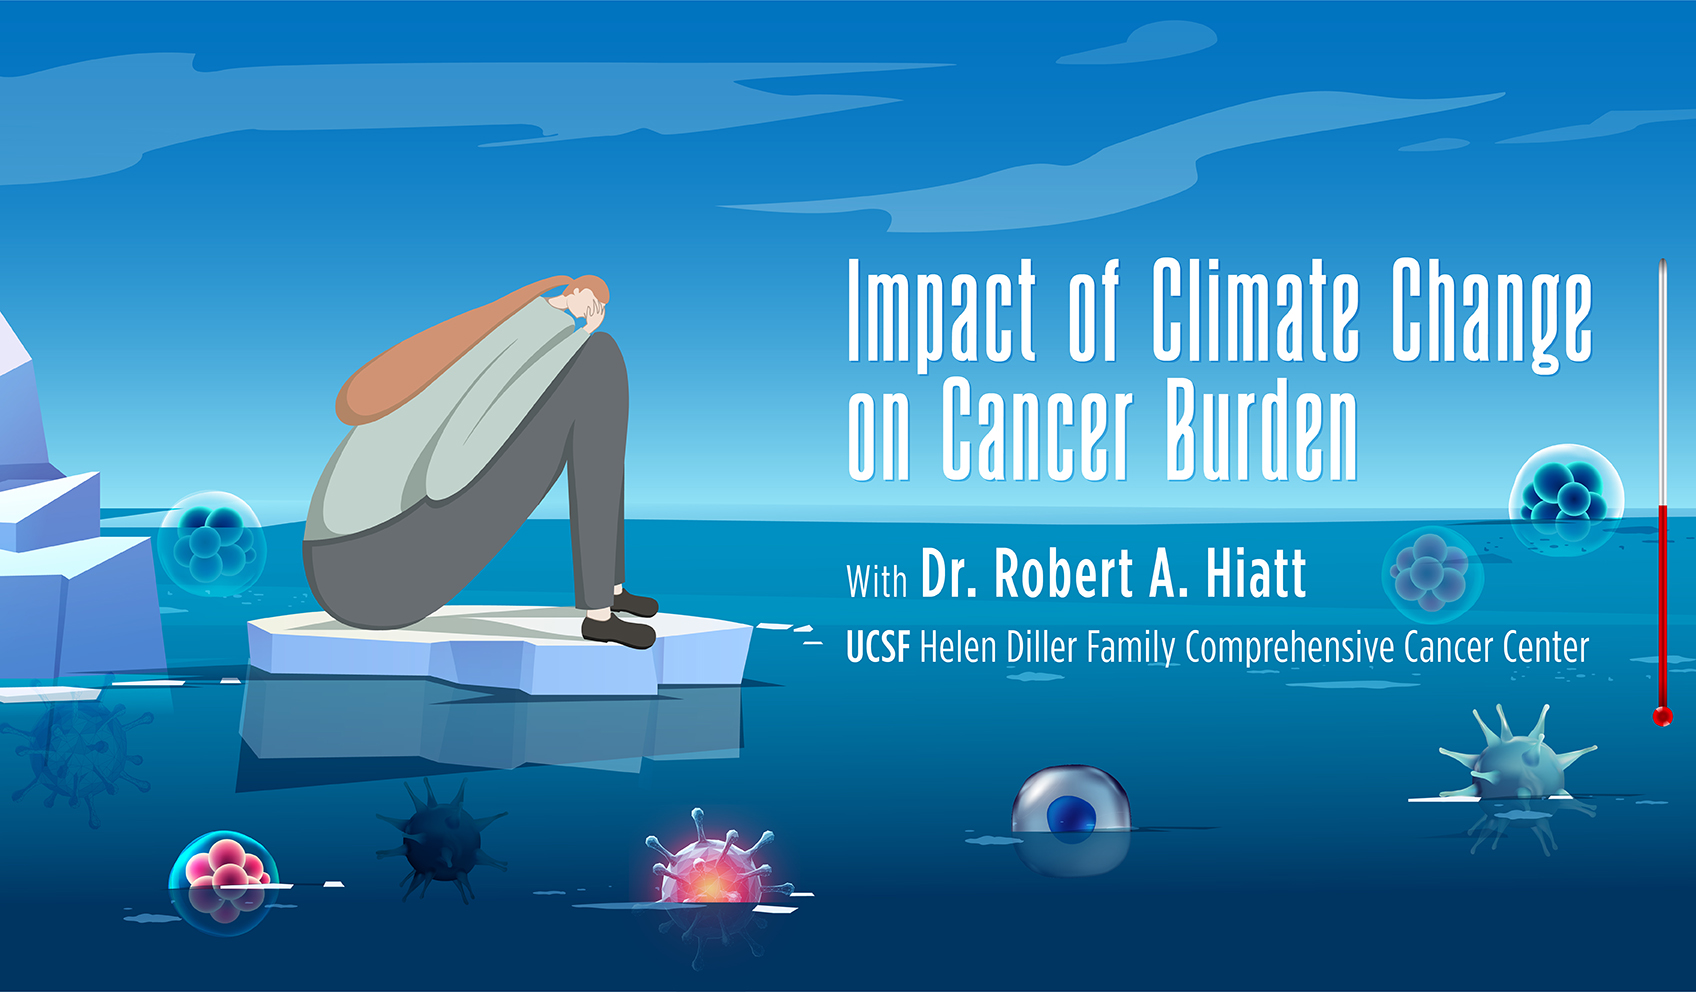 Impact of Climate Change on Cancer Burden